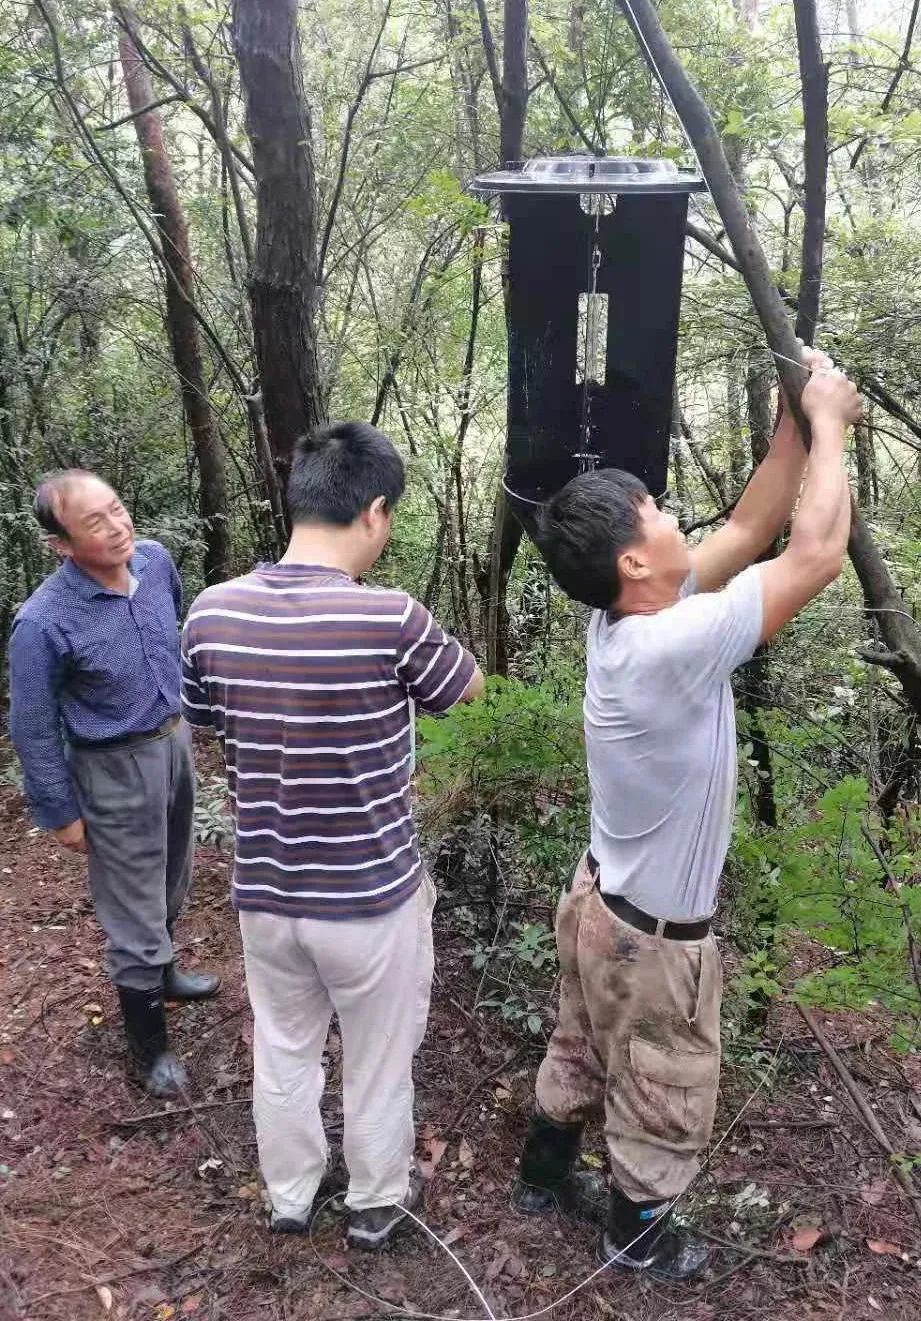 Our company's representative instructs workers to hang traps